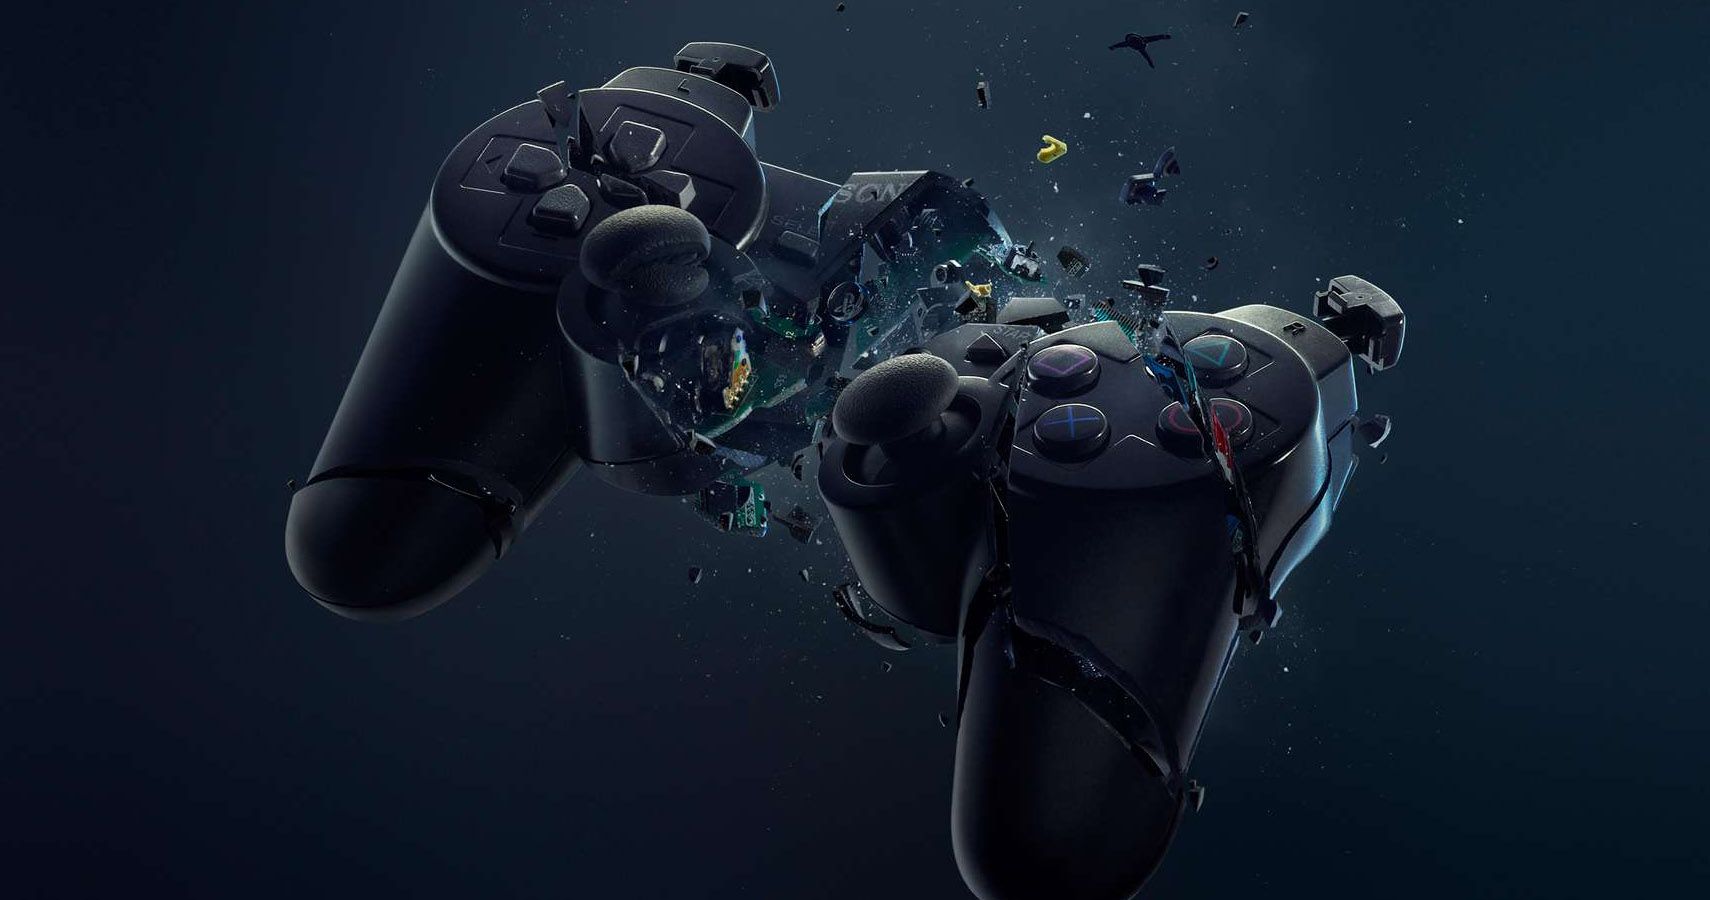 Why do people rage quit in games? - Quora